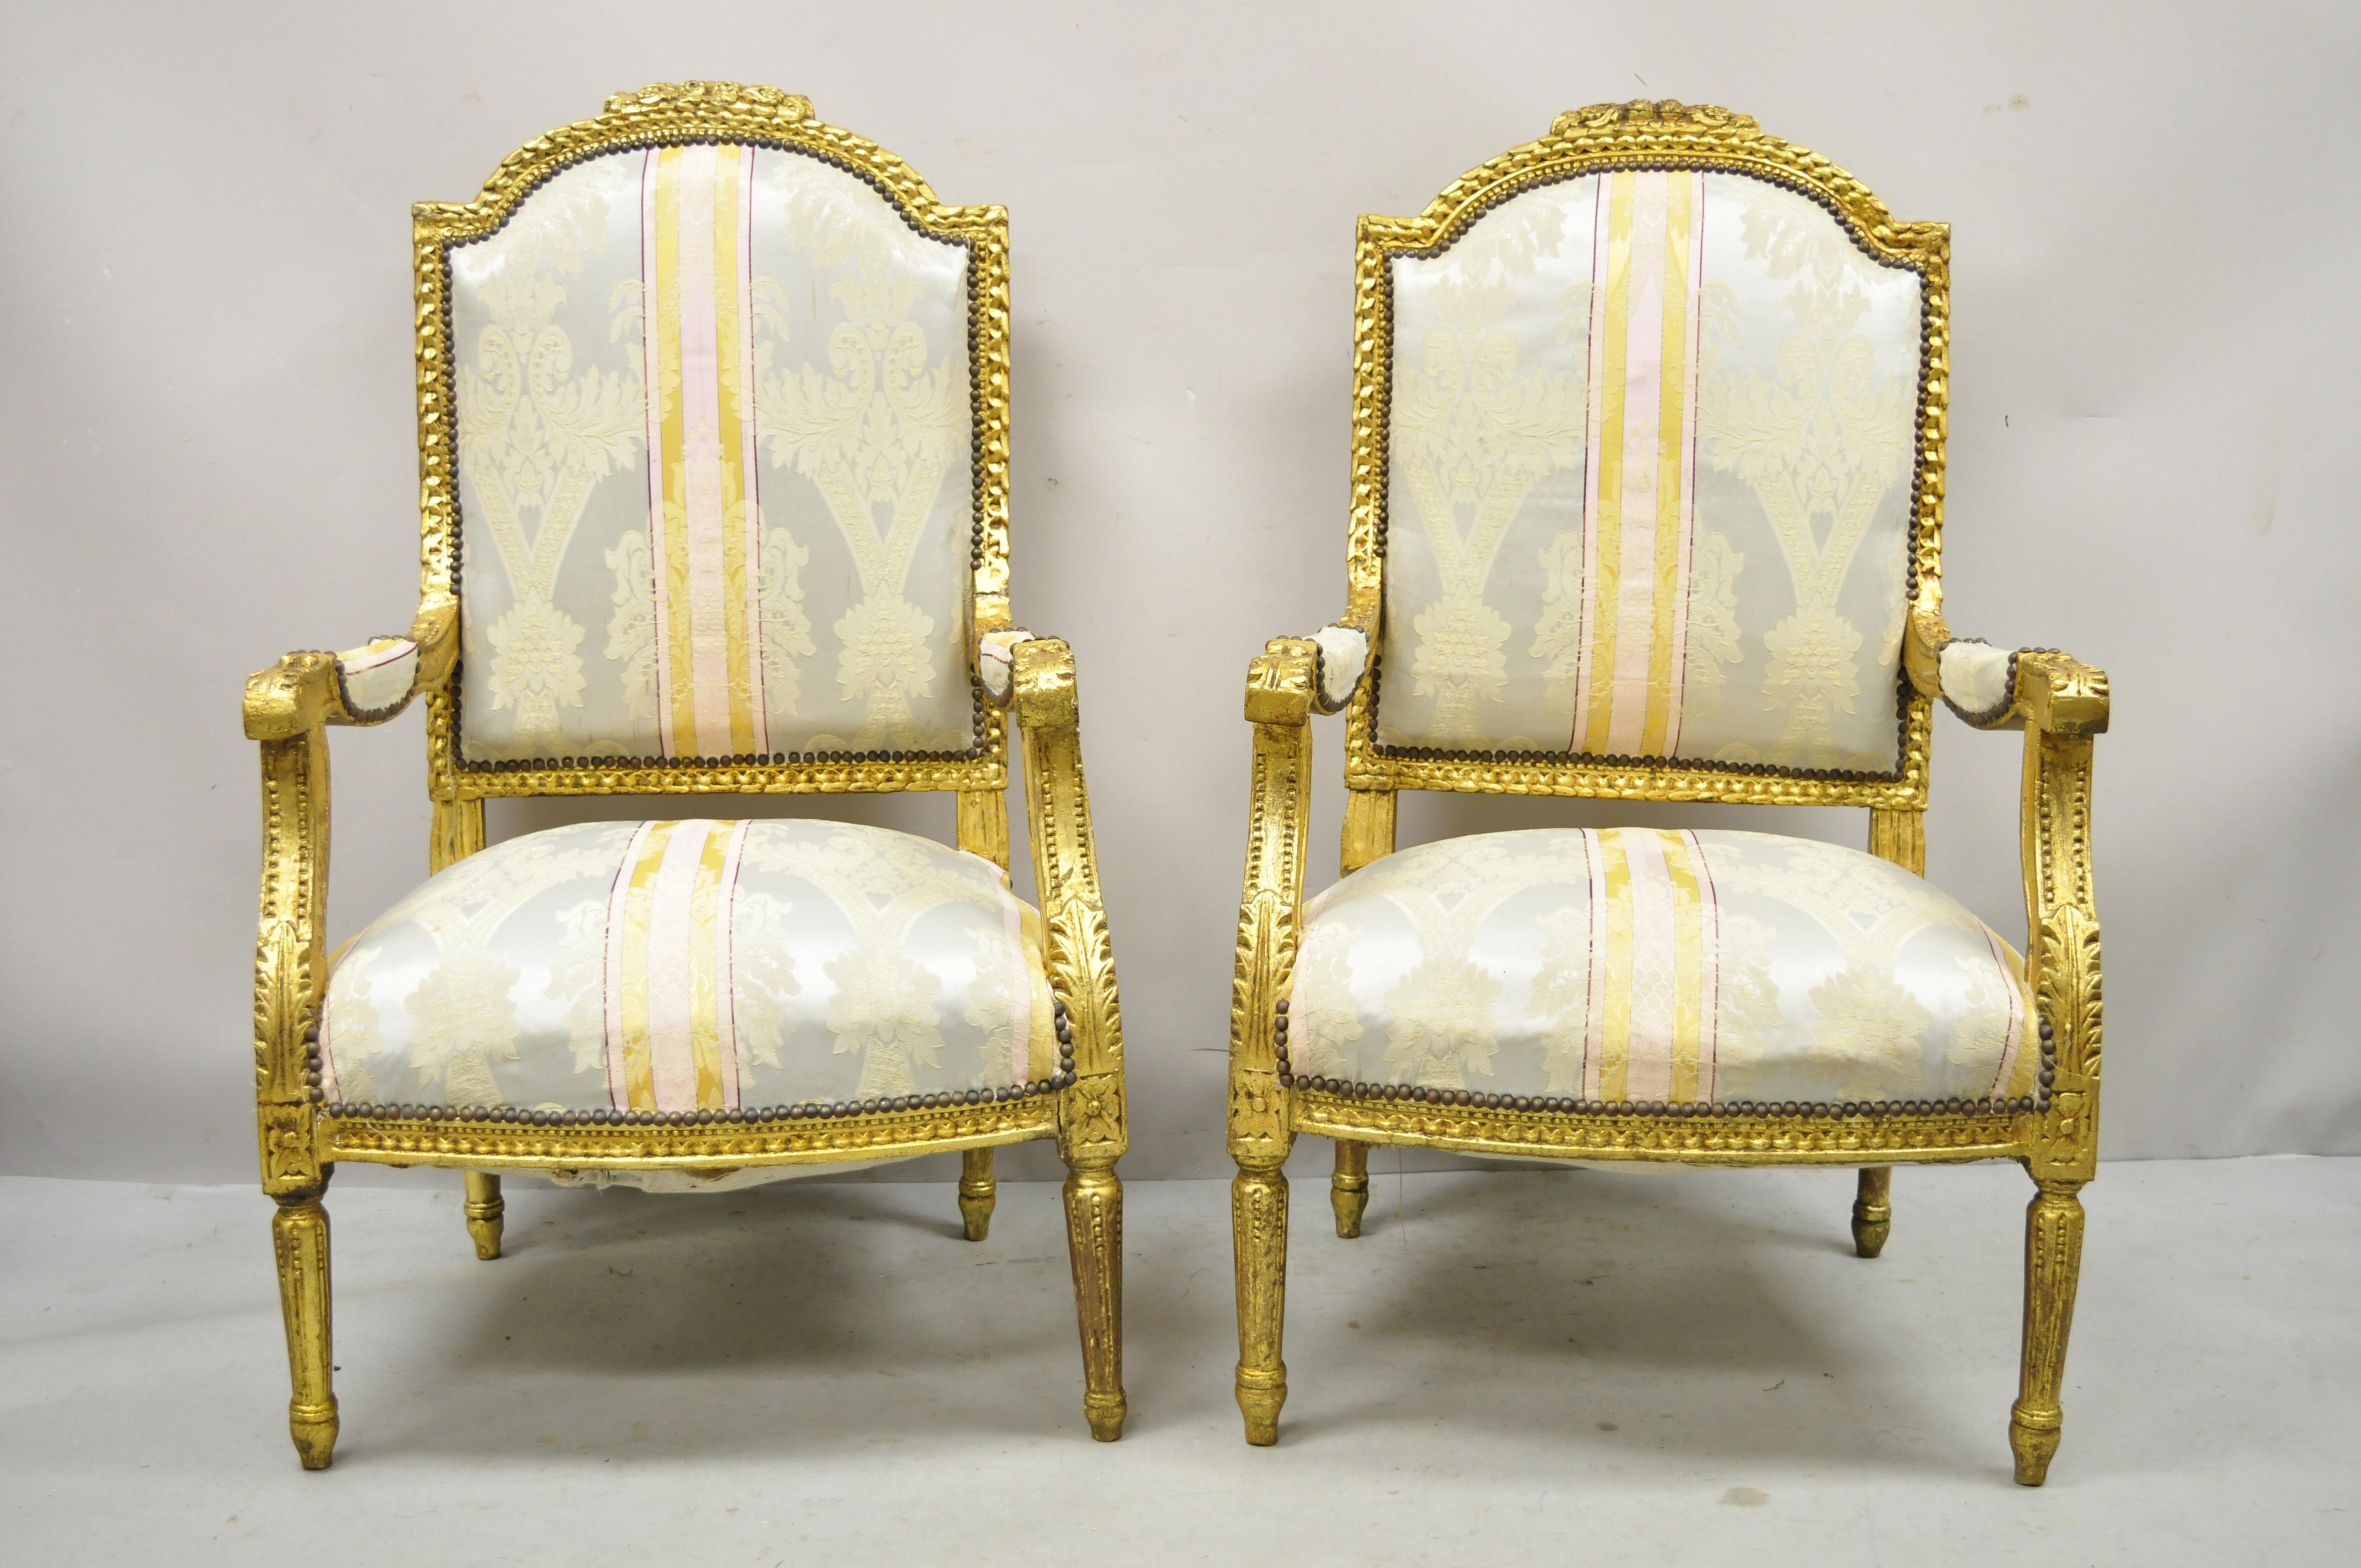 Vintage French Louis XVI carved gold giltwood upholstered lounge arm chairs (A) - a Pair. Item features distressed gold gilt finish, floral carved details, solid wood frames, tapered legs, great style and form. Circa Late 20th Century. Measurements: